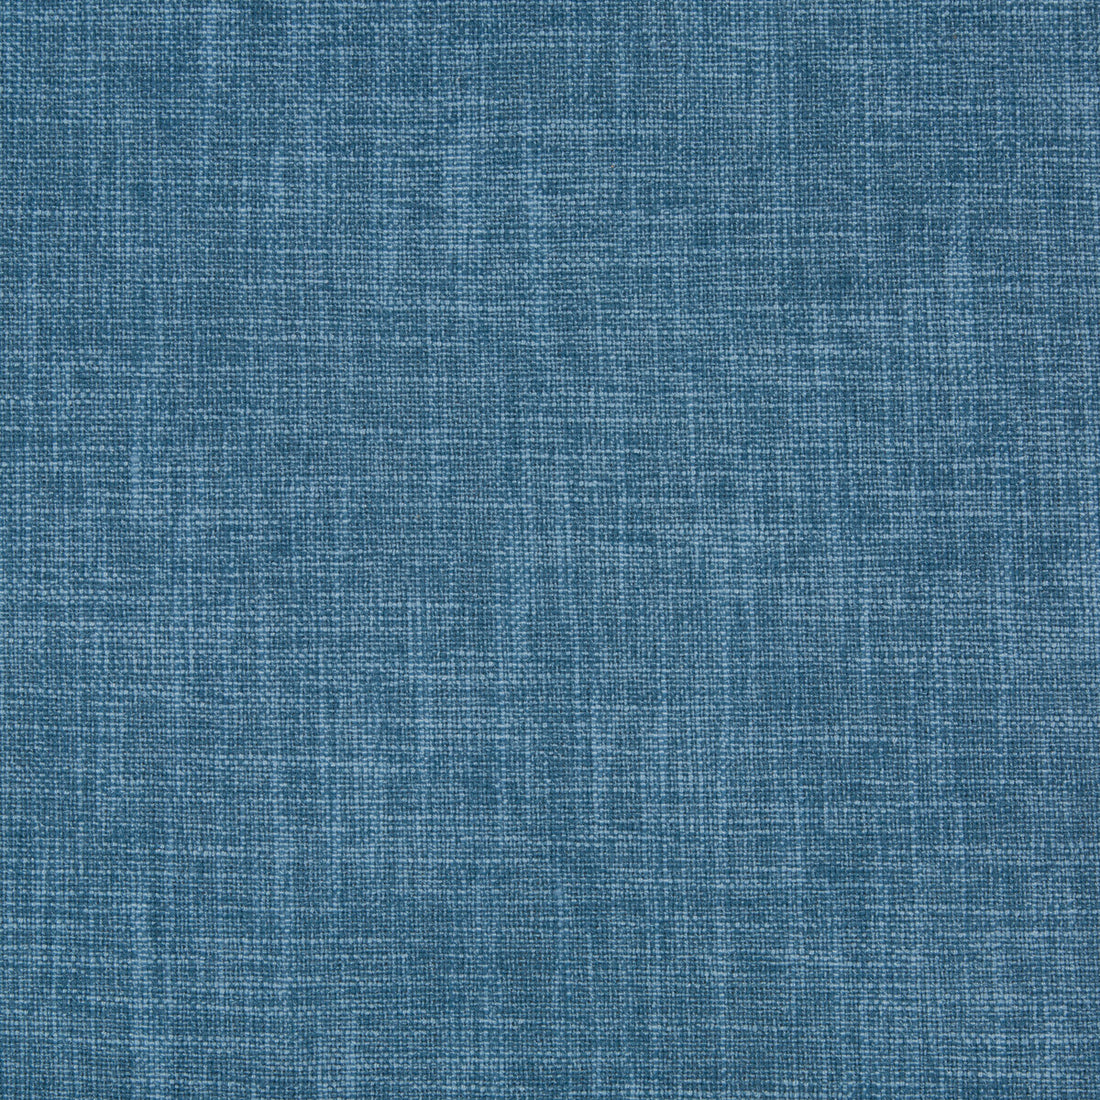 Everywhere fabric in indigo color - pattern 34587.5.0 - by Kravet Basics in the Thom Filicia Altitude collection